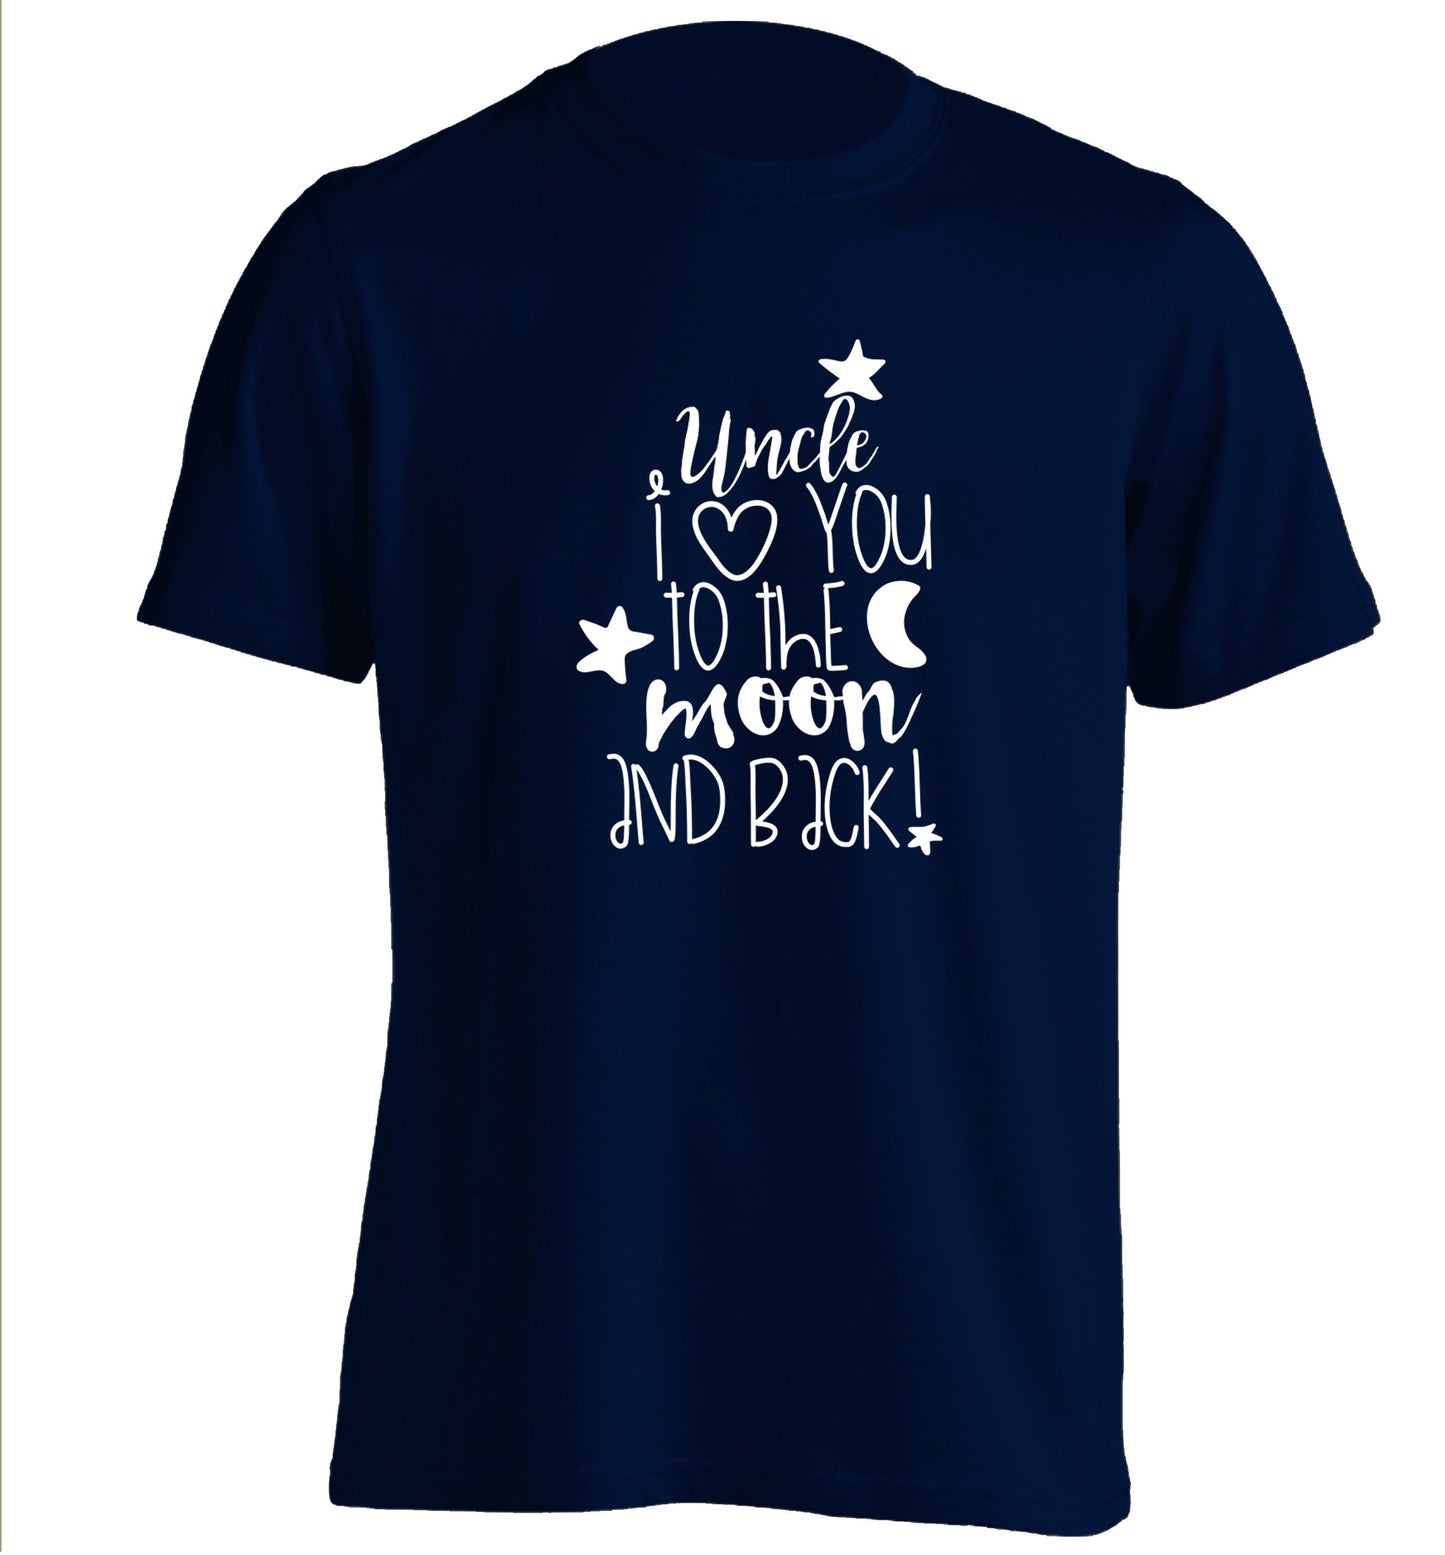 Uncle I love you to the moon and back adults unisex navy Tshirt 2XL